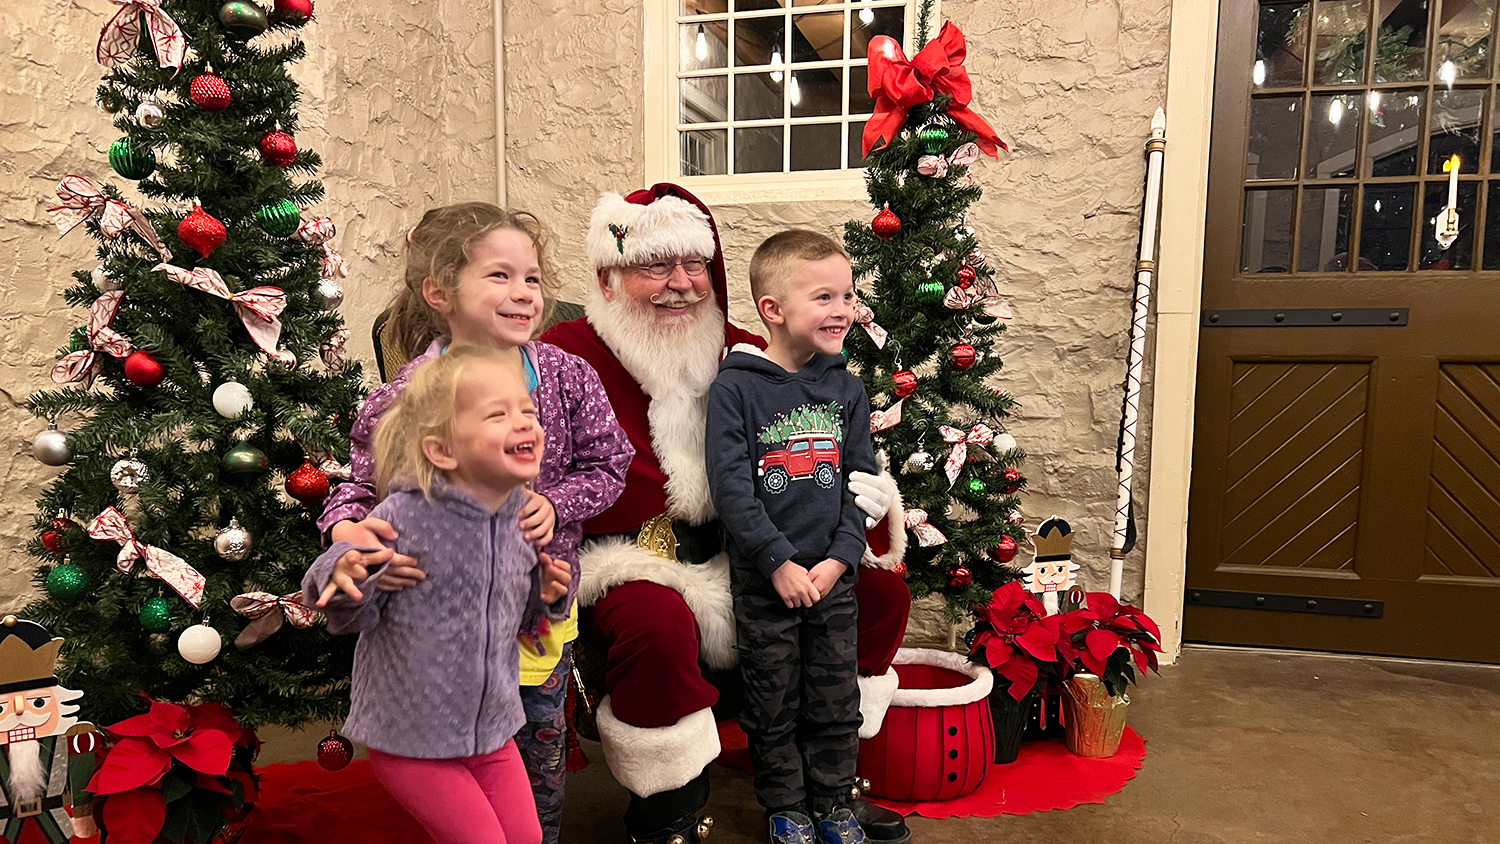 Three small children smile as they pose with Santa.